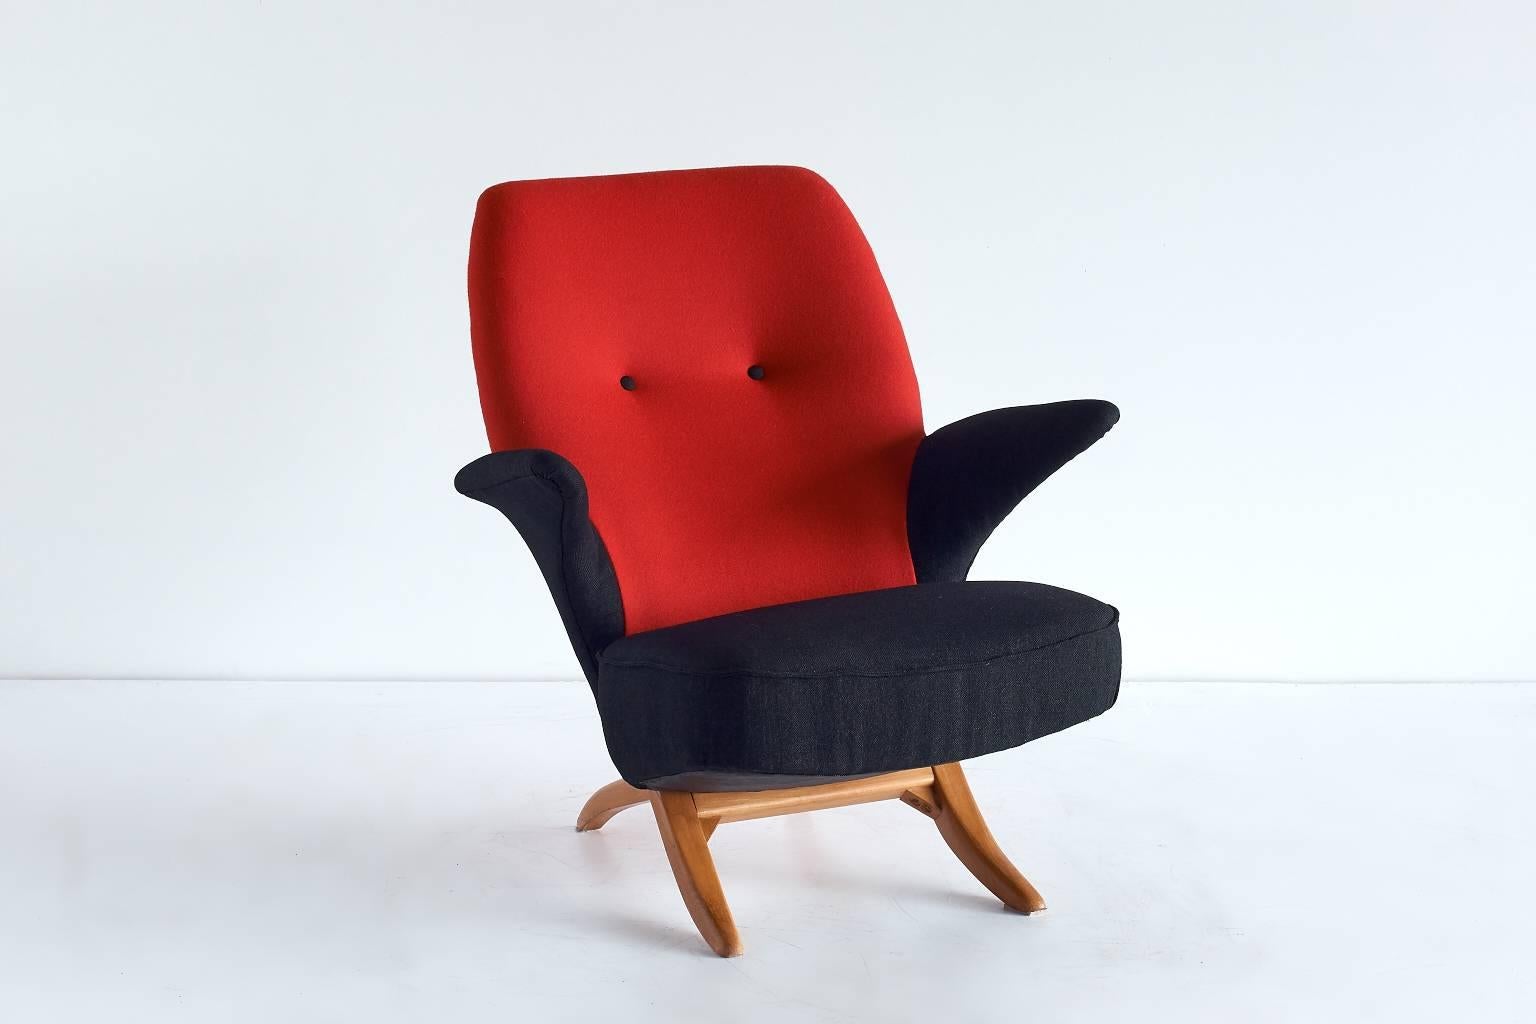 The iconic Penguin chair was designed by Theo Ruth and produced by Artifort in 1957. It is the successor of the Congo chair. The ingenious design consists of two interlocking pieces which can be separated. The chair is upholstered in a black and red